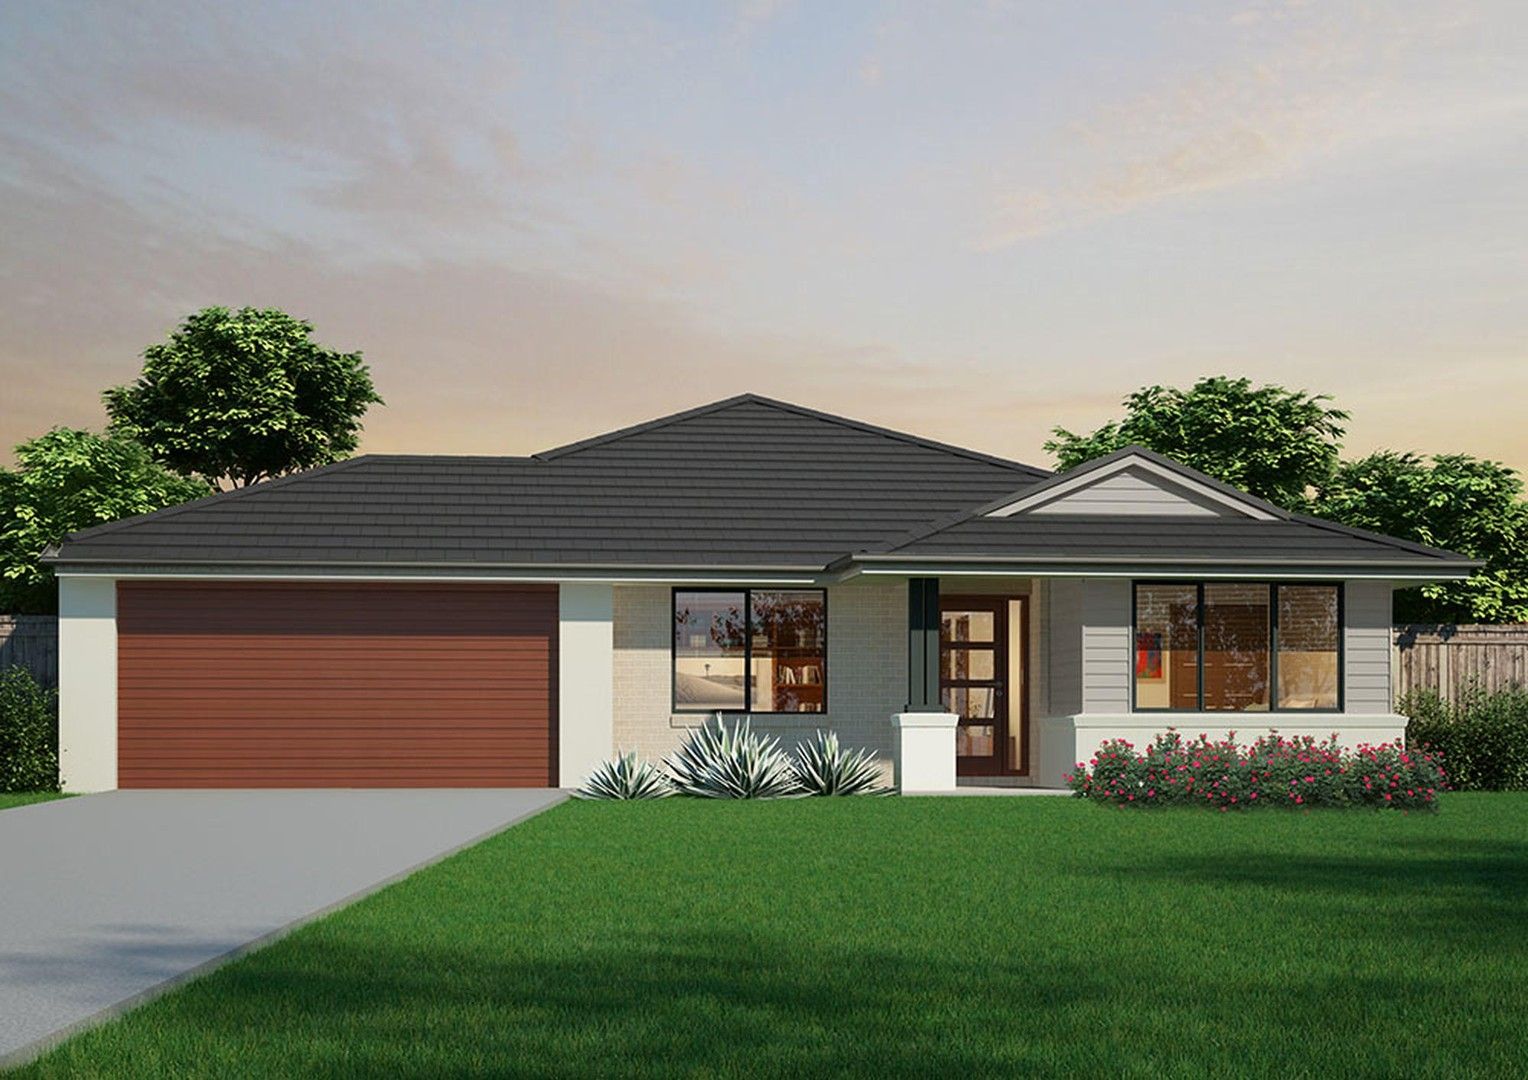 3 bedrooms New House & Land in 1297 Fowler Road GAWLER EAST SA, 5118